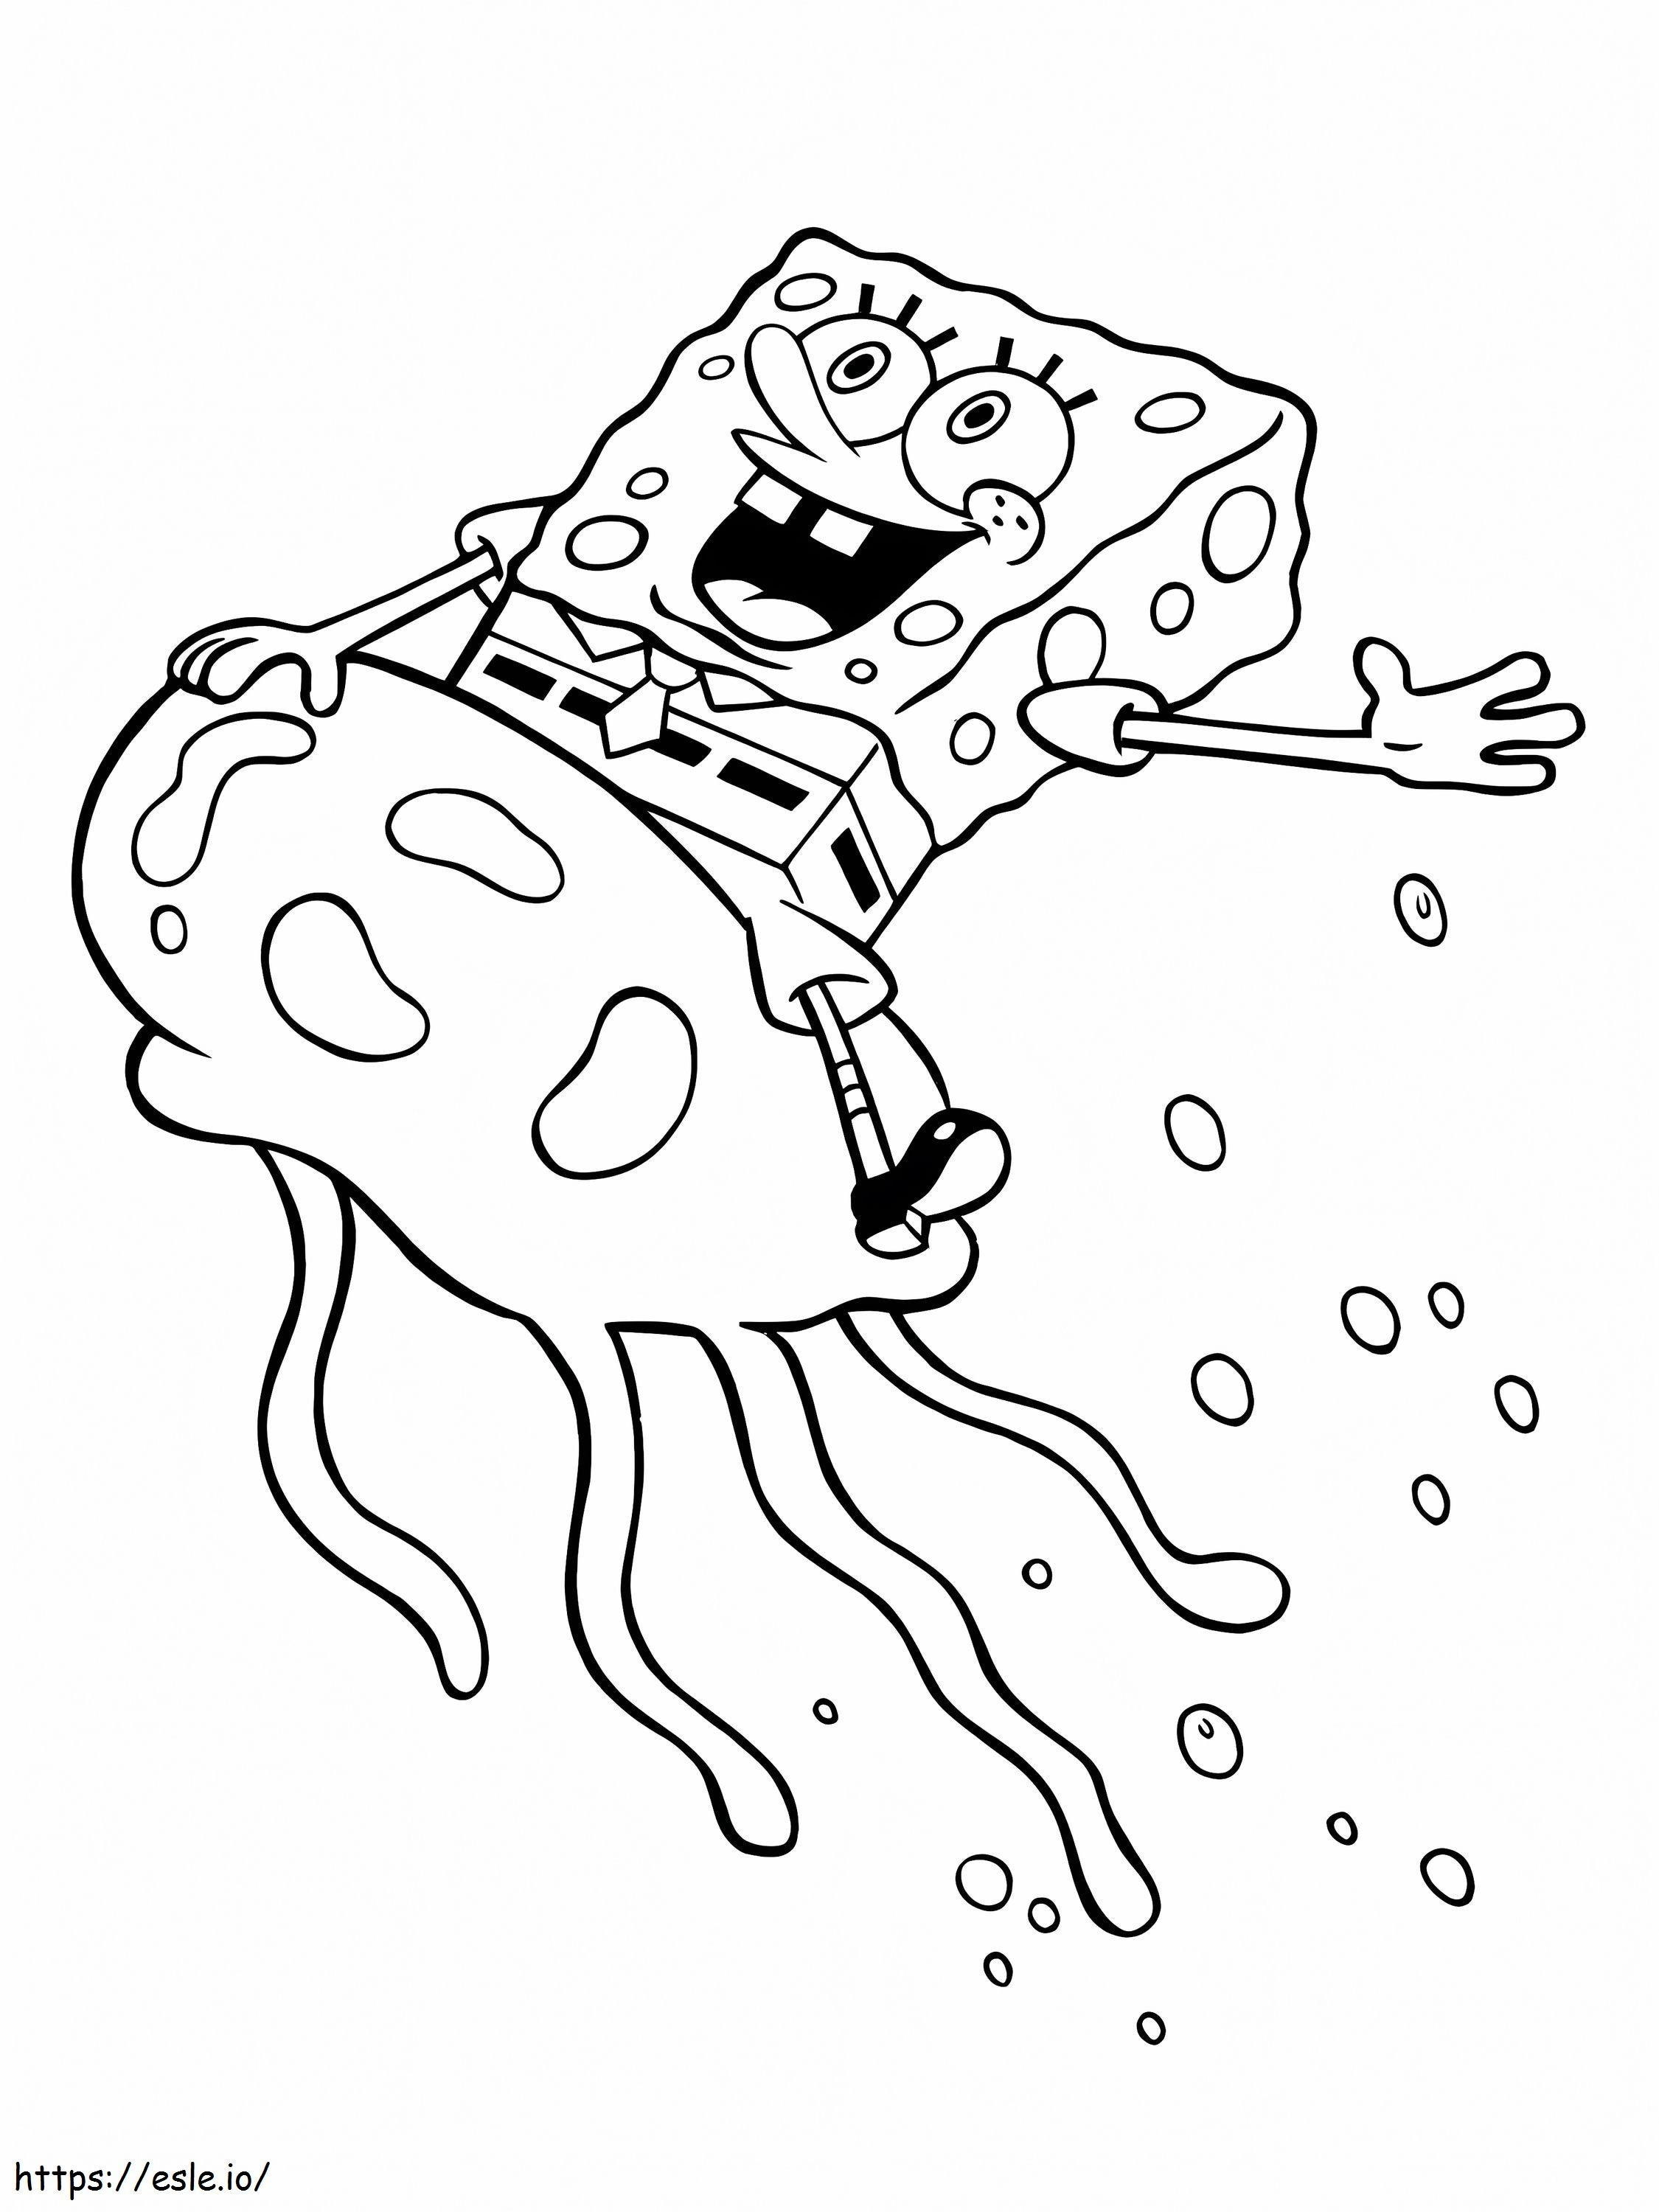 SpongeBob On Jellyfish coloring page